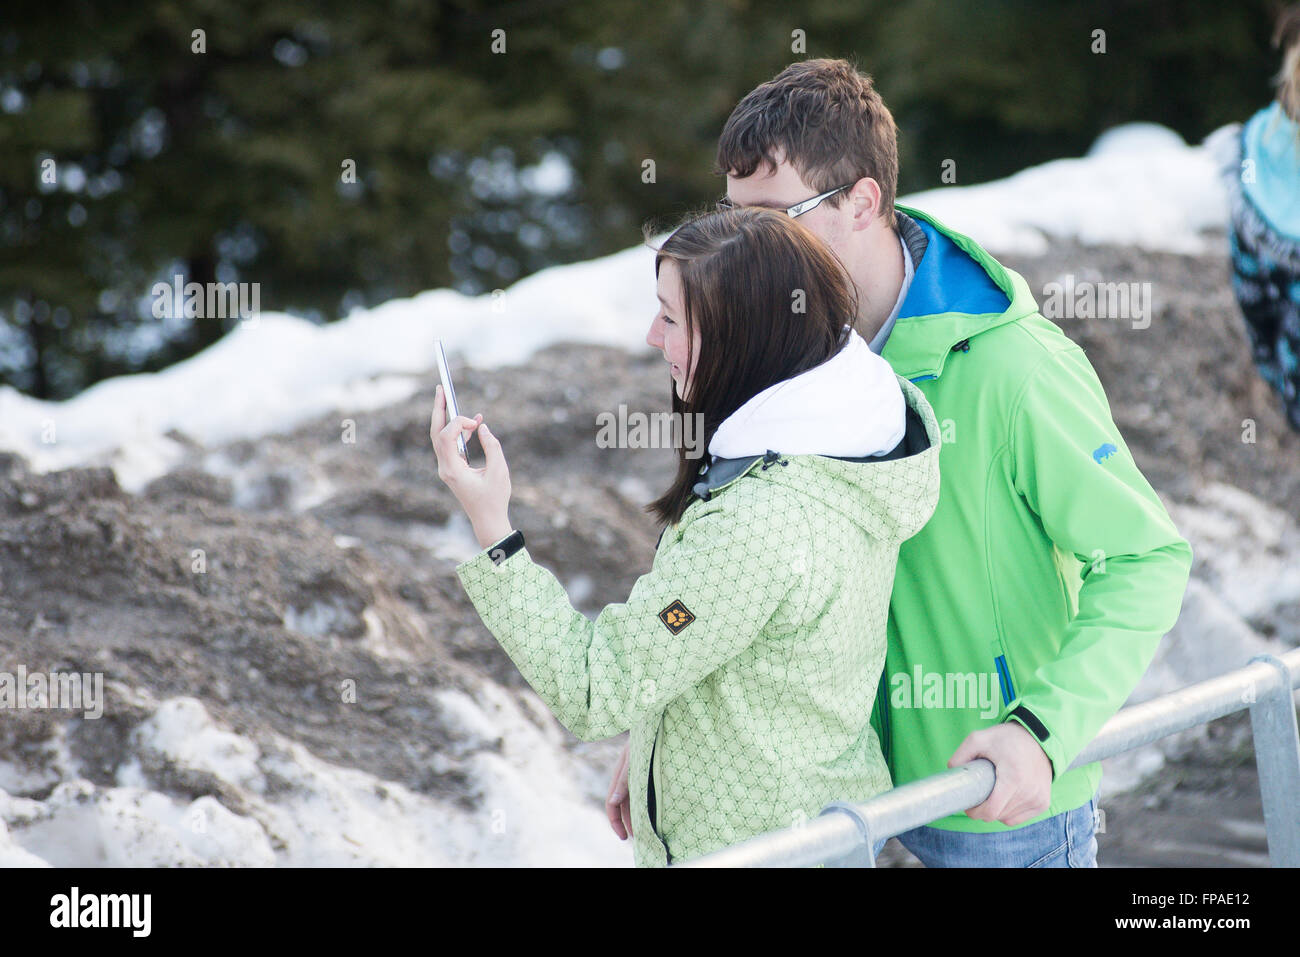 Planica, Slovenia. 18th Mar, 2016. Couple taking selfies at the FIS Ski Jumping World Cup finals in Planica, Slovenia on March 18, 2016. © Rok Rakun/Pacific Press/Alamy Live News Stock Photo